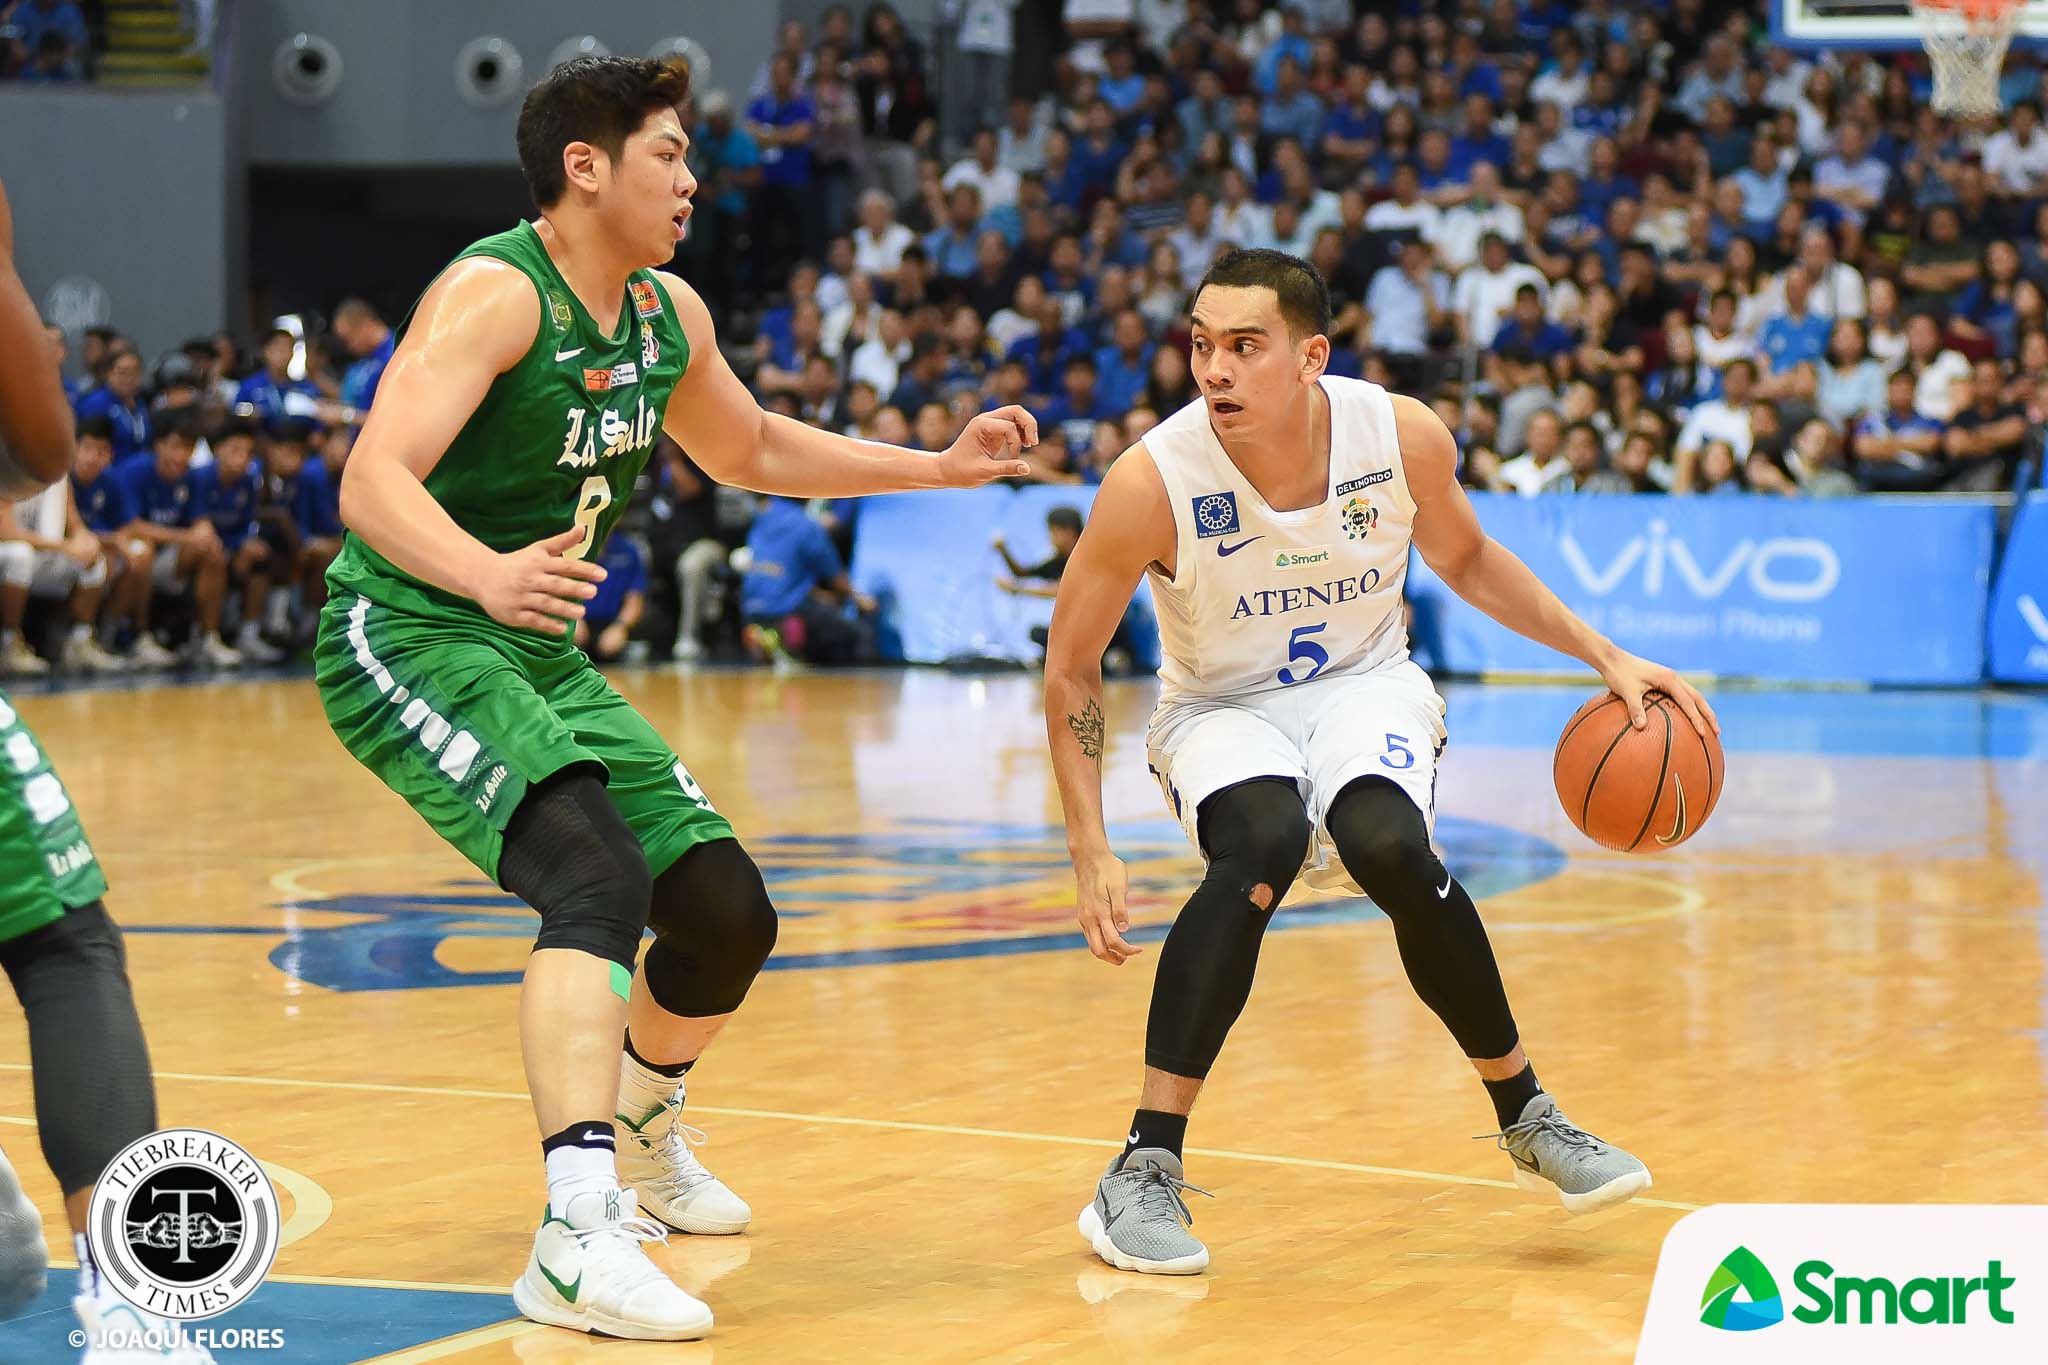 UAAP-80-Finals-G1-DLSU-vs.-ADMU-Tolentino-9586 Captain Vince Tolentino makes the right choice ADMU Basketball News UAAP  - philippine sports news